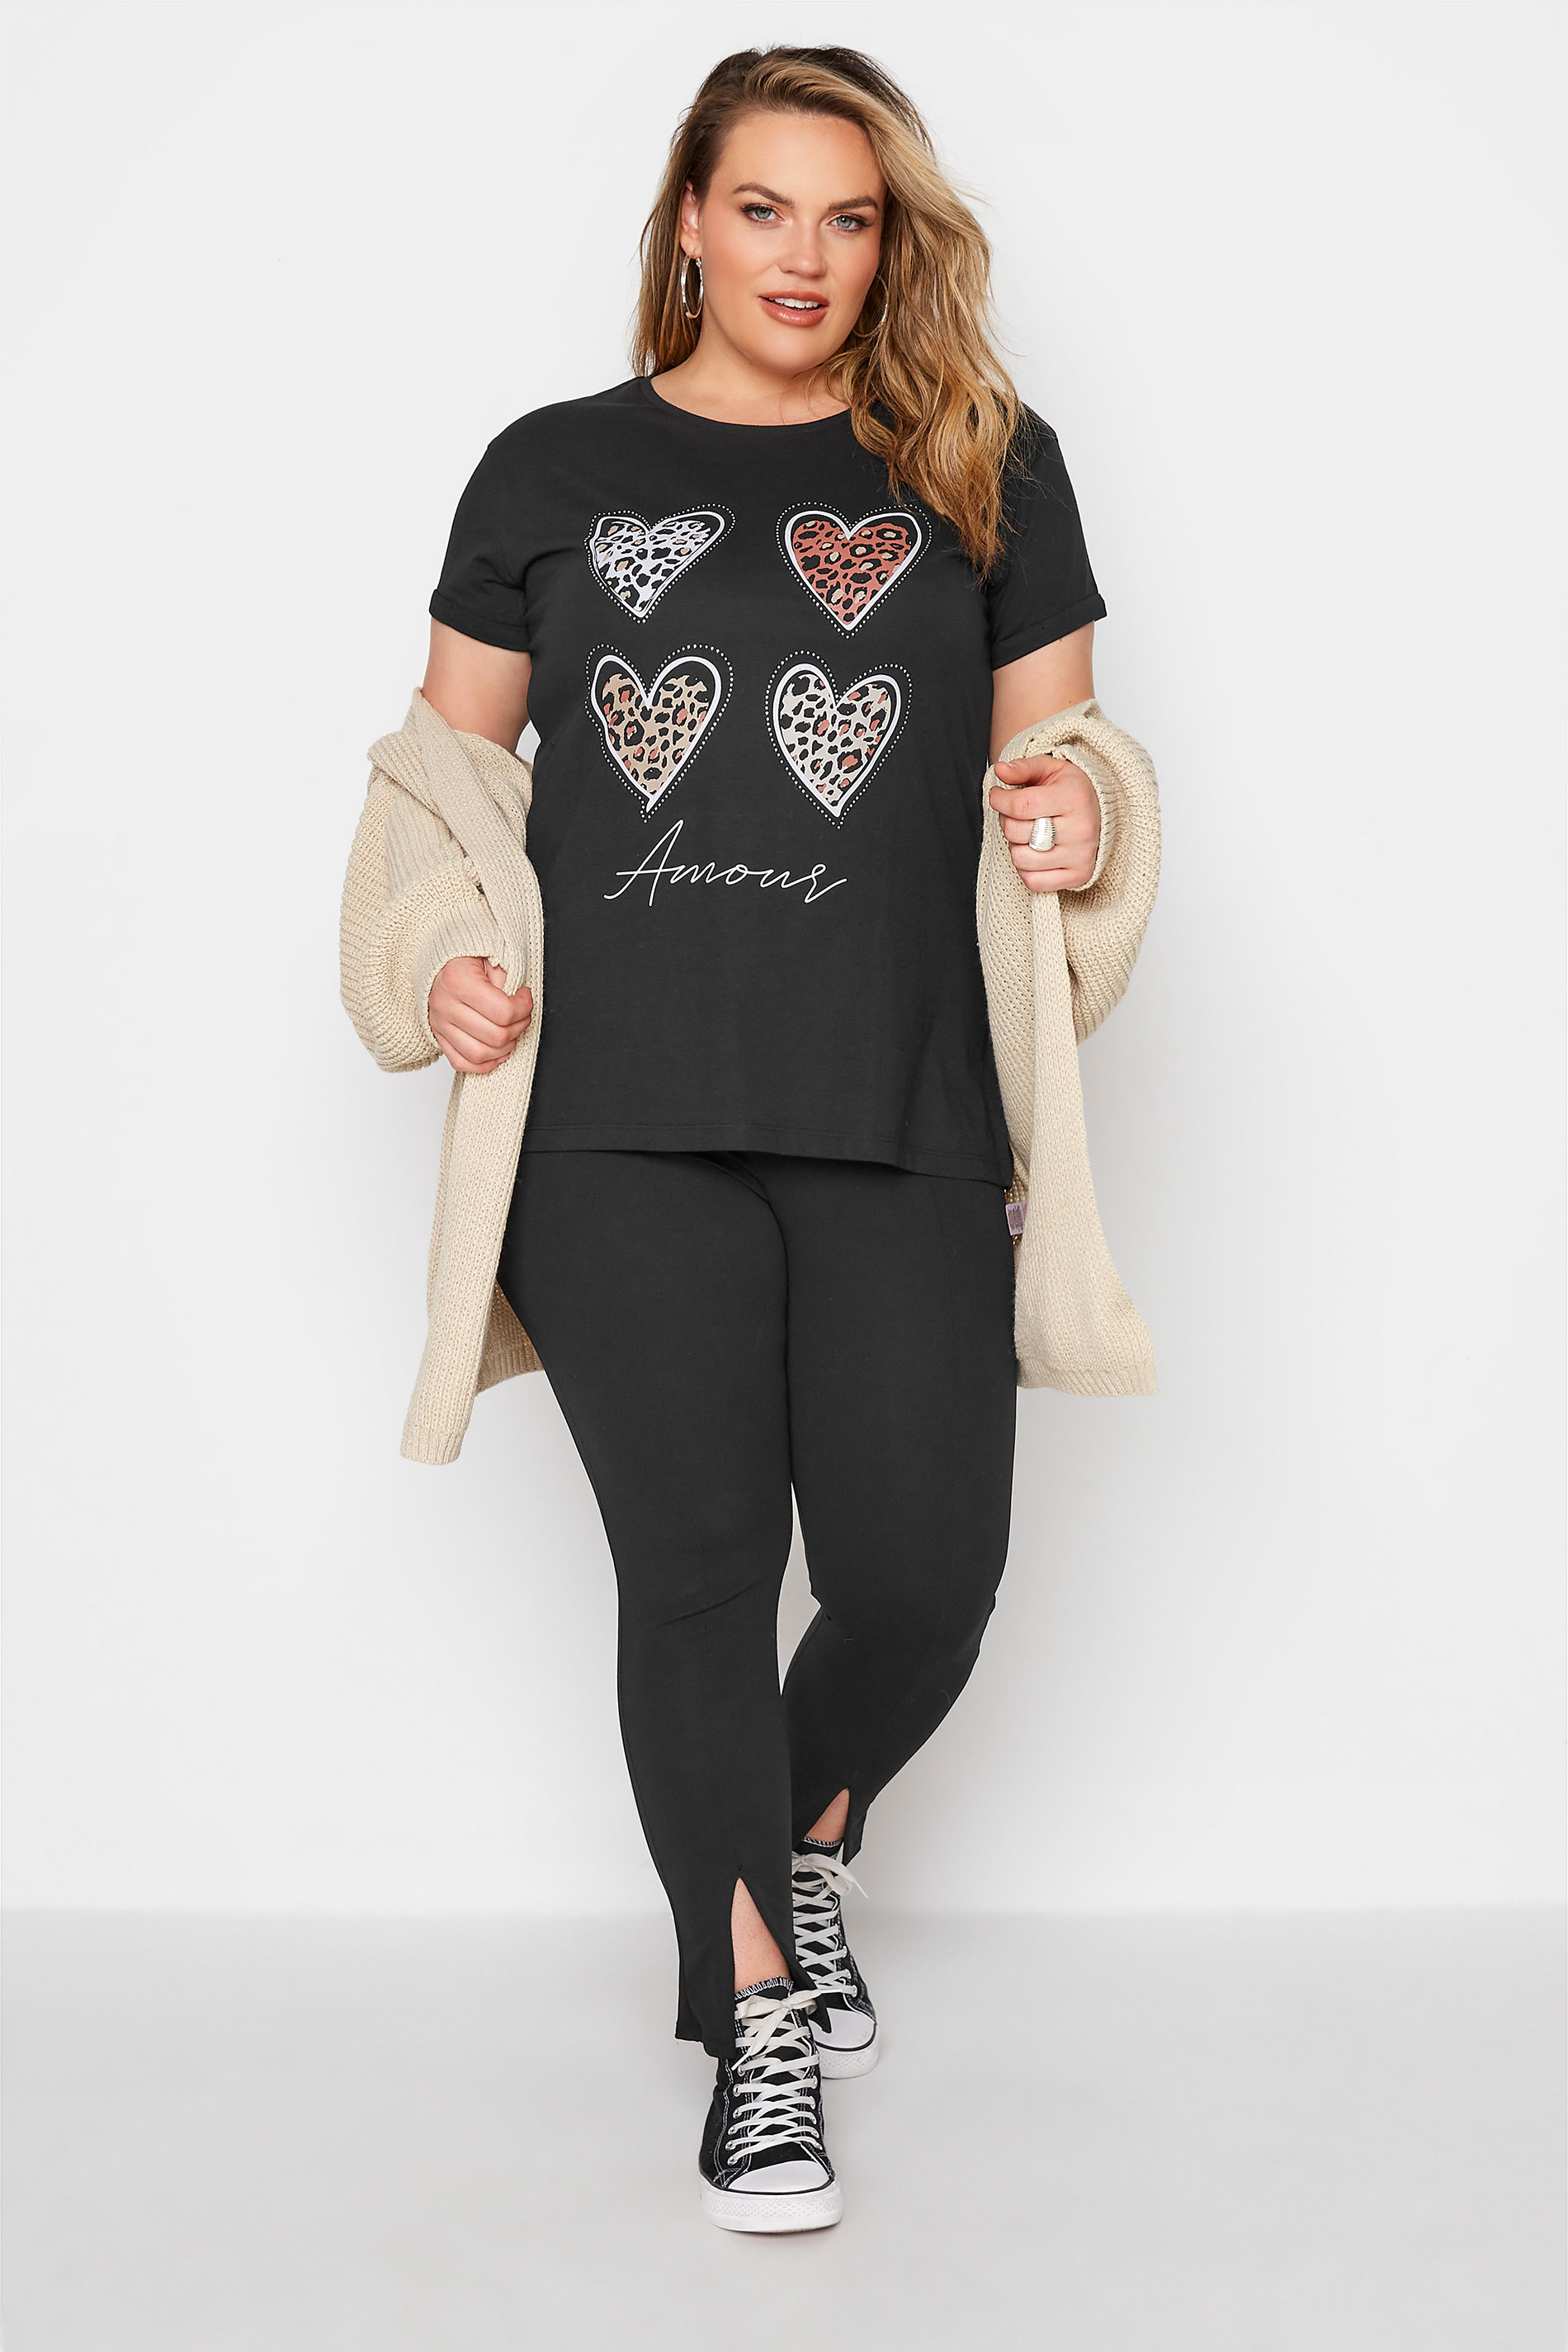 Grande taille  Tops Grande taille  Tops Jersey | T-Shirt Noir Animal & Coeur Slogan 'Amour' - RK57111